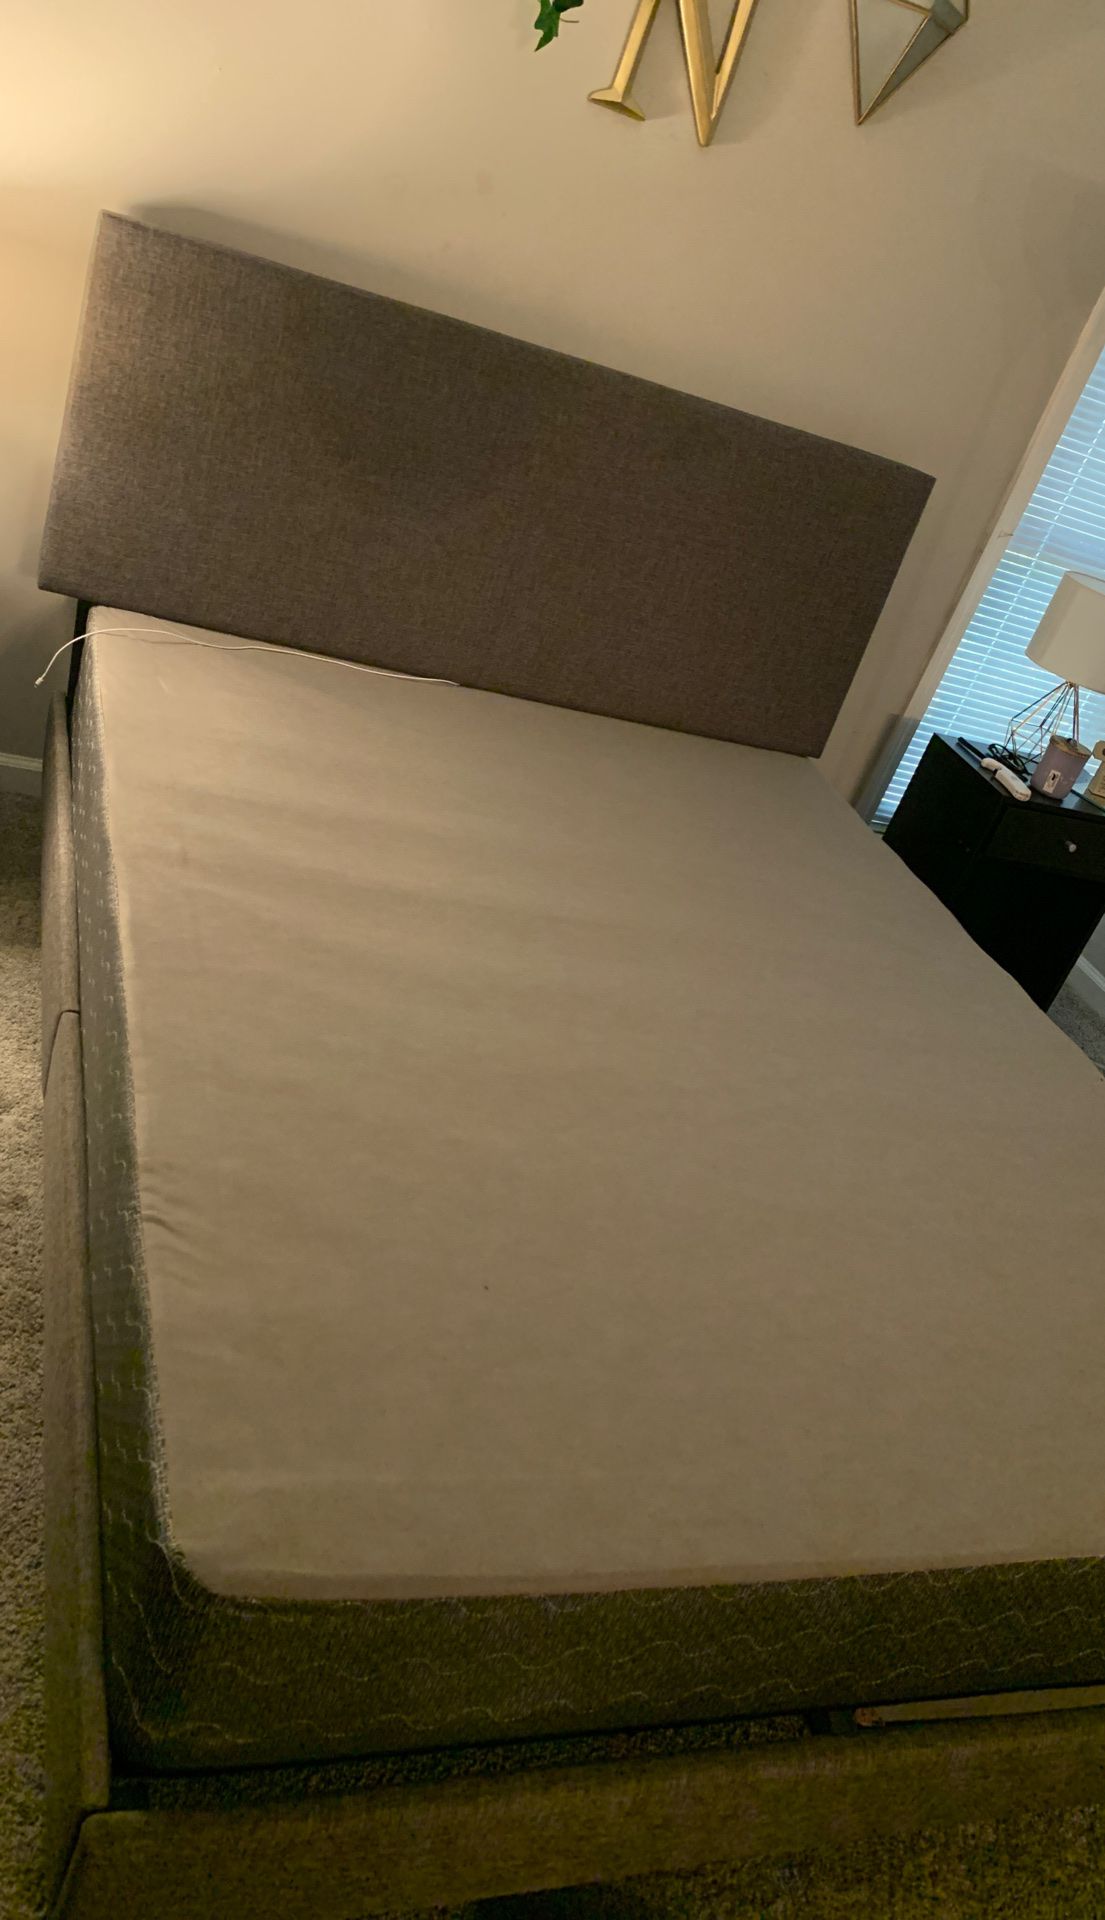 Queen box spring and bed frame